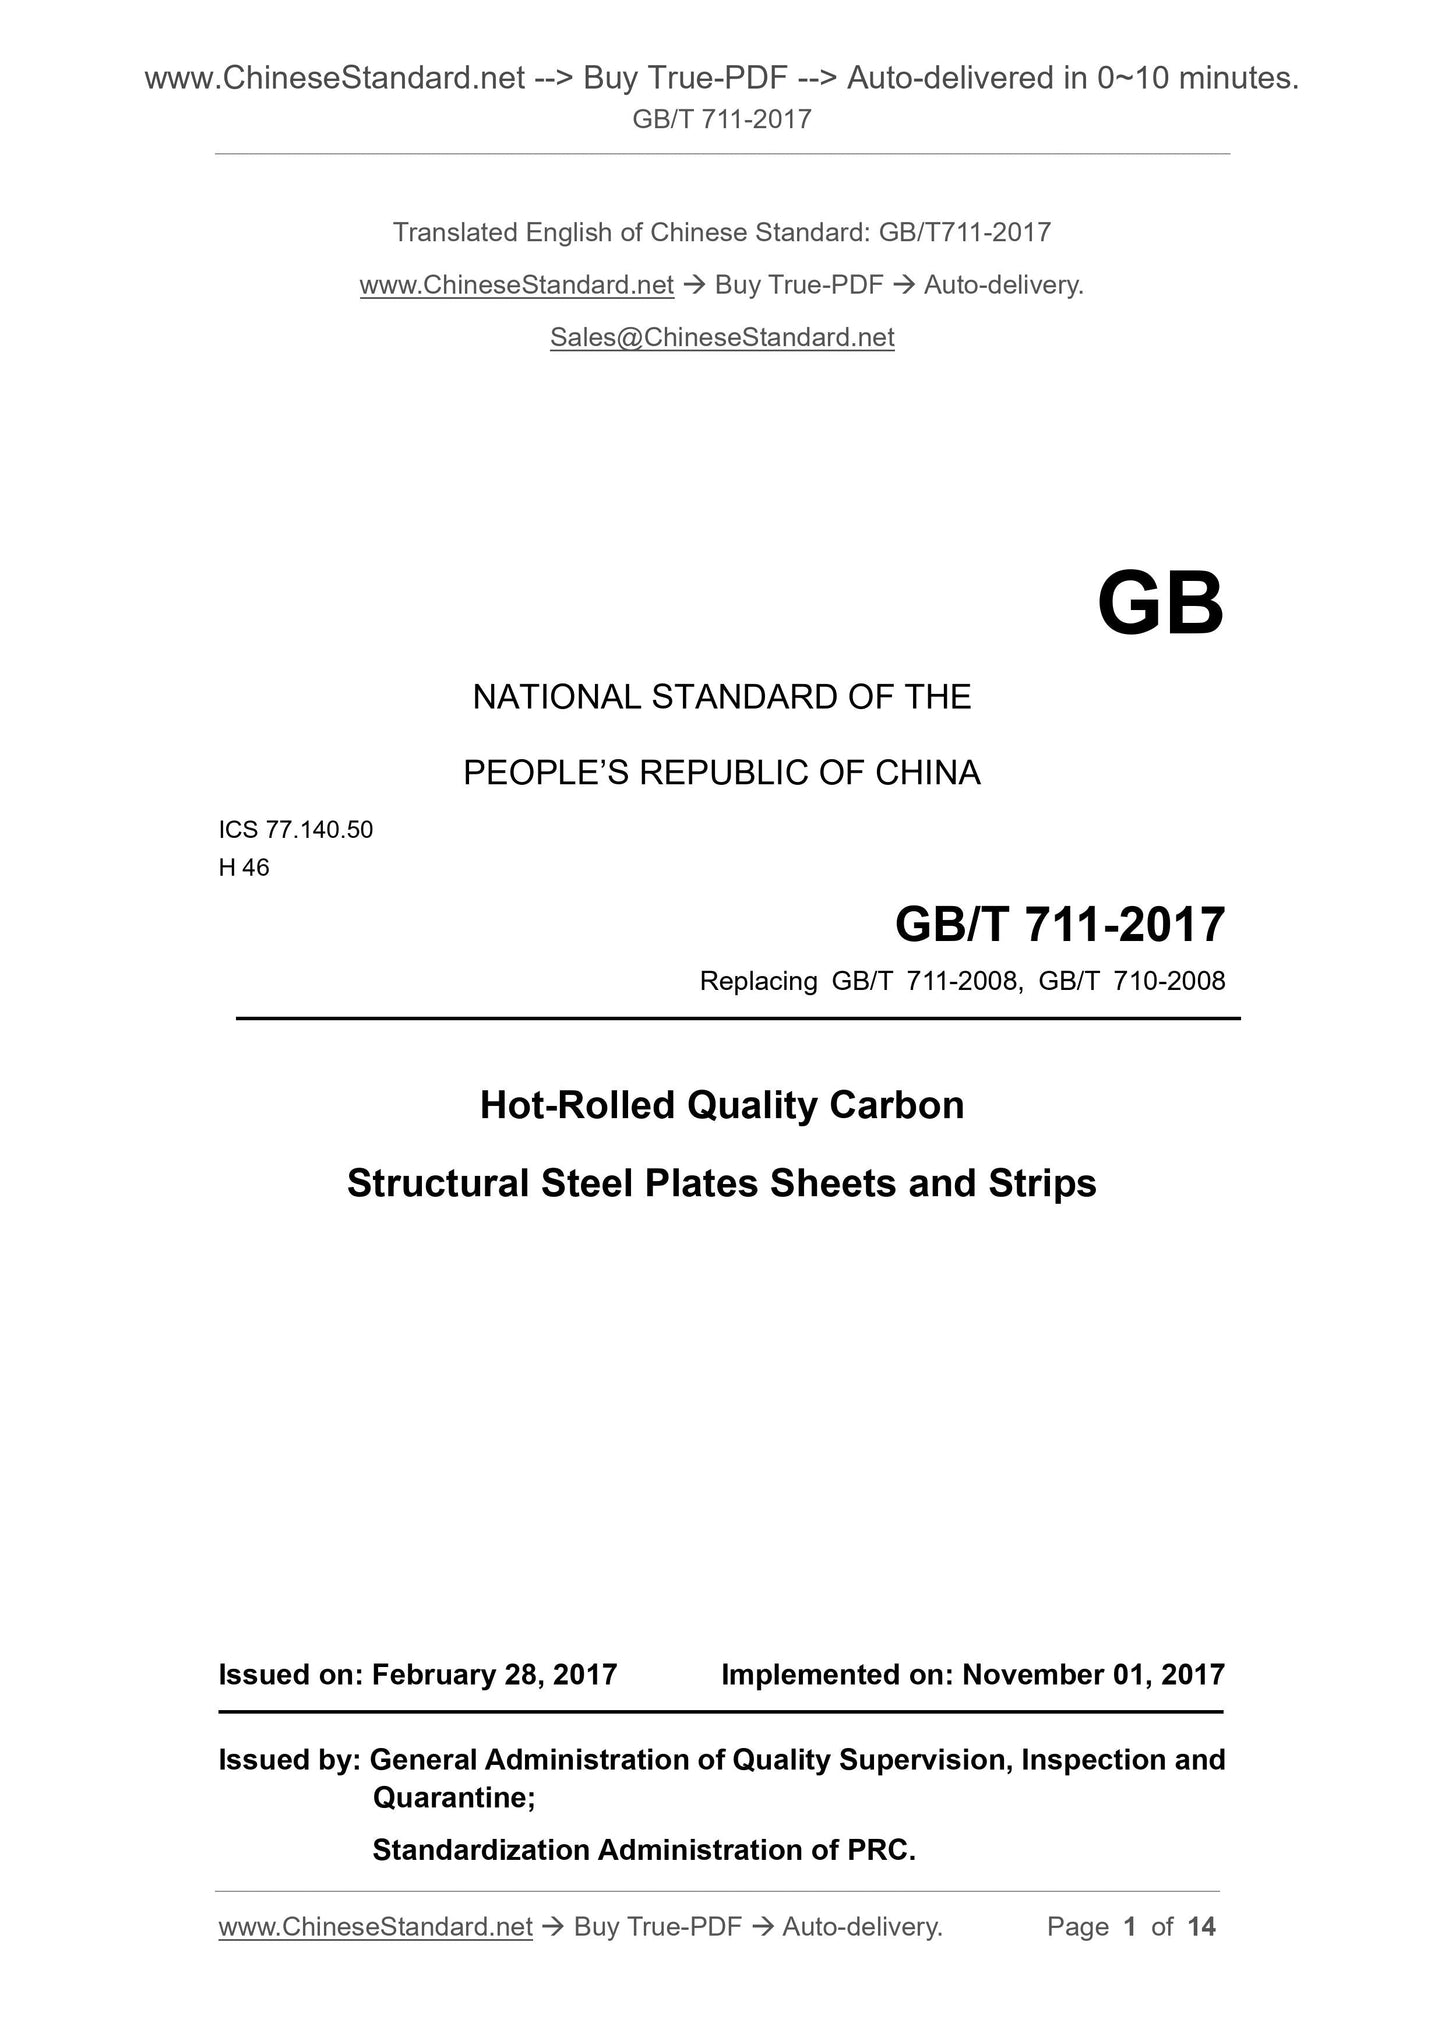 GB/T 711-2017 Page 1